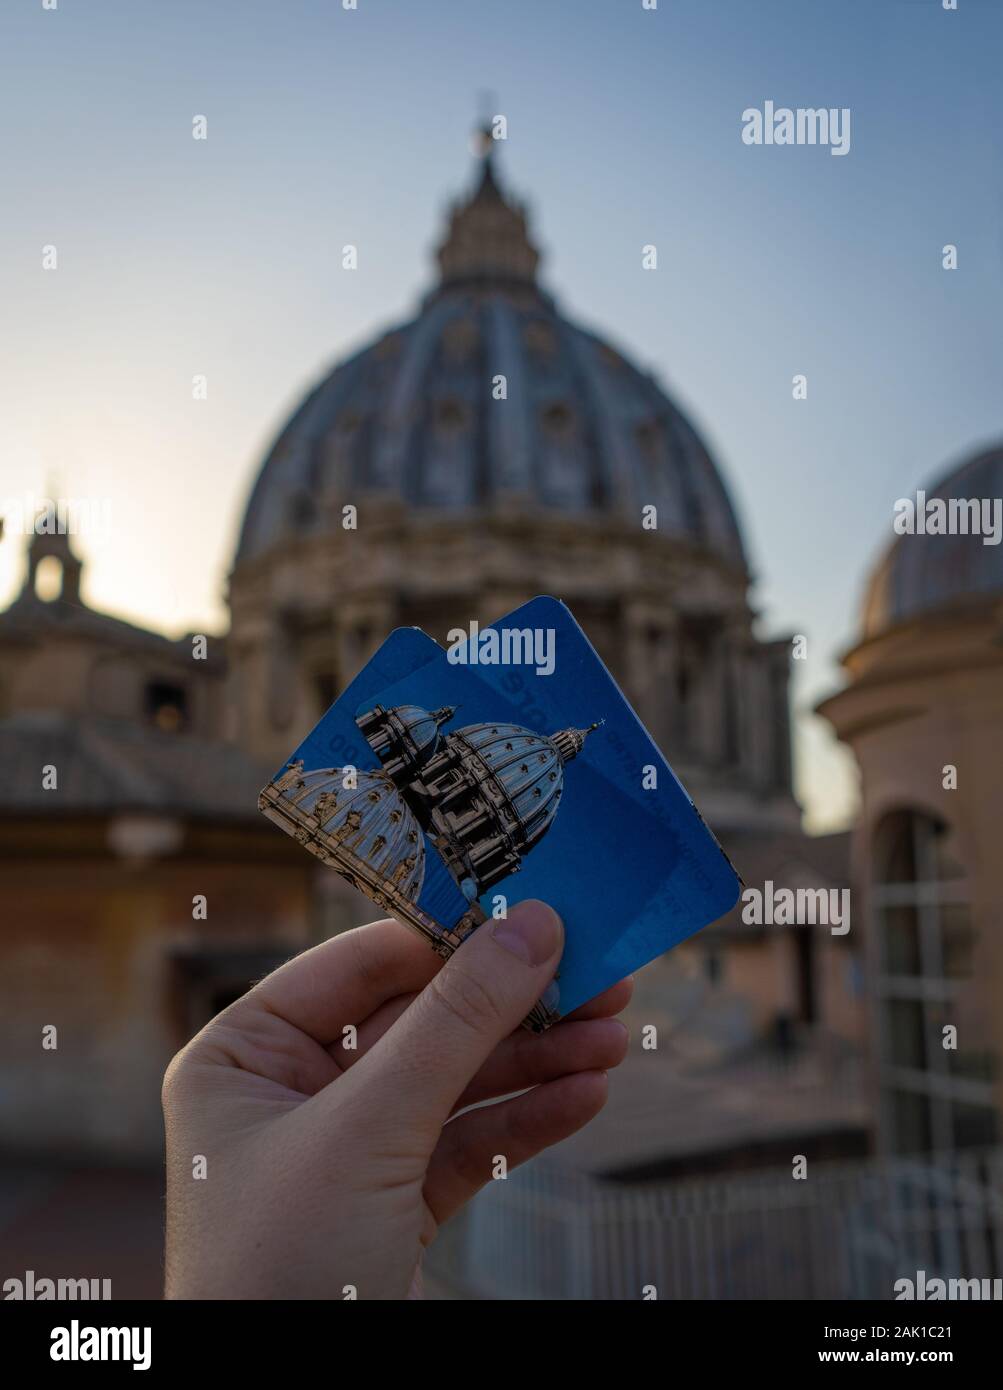 A girl is holding two tickets to the dome of Saint Peter's Basilica of Vatican in front of the dome. Focuse is on the tickets, blurred background Stock Photo